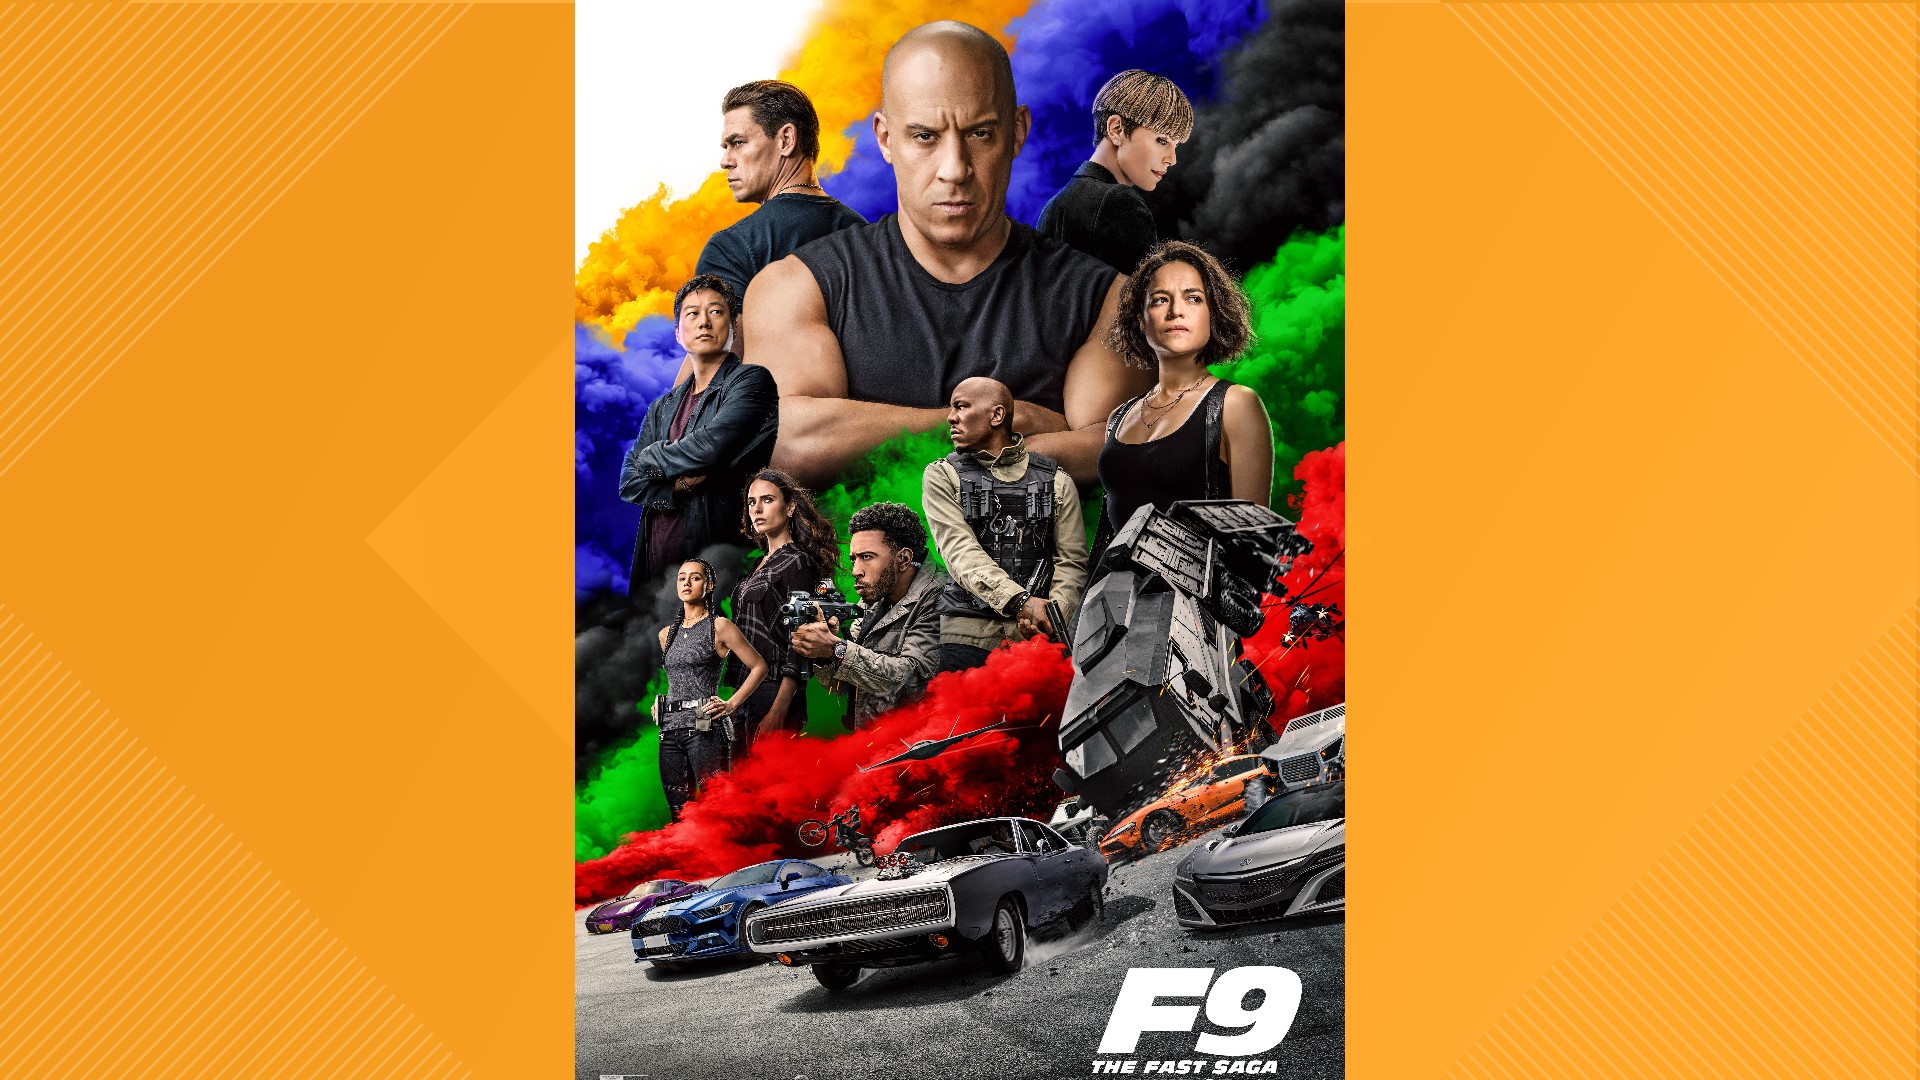 The new installment directed by Justin Lil, stars Vin Diesel, Michelle Rodriguez, Tyrese Gibson, Chris “Ludacris” Bridges,  and John Cena.